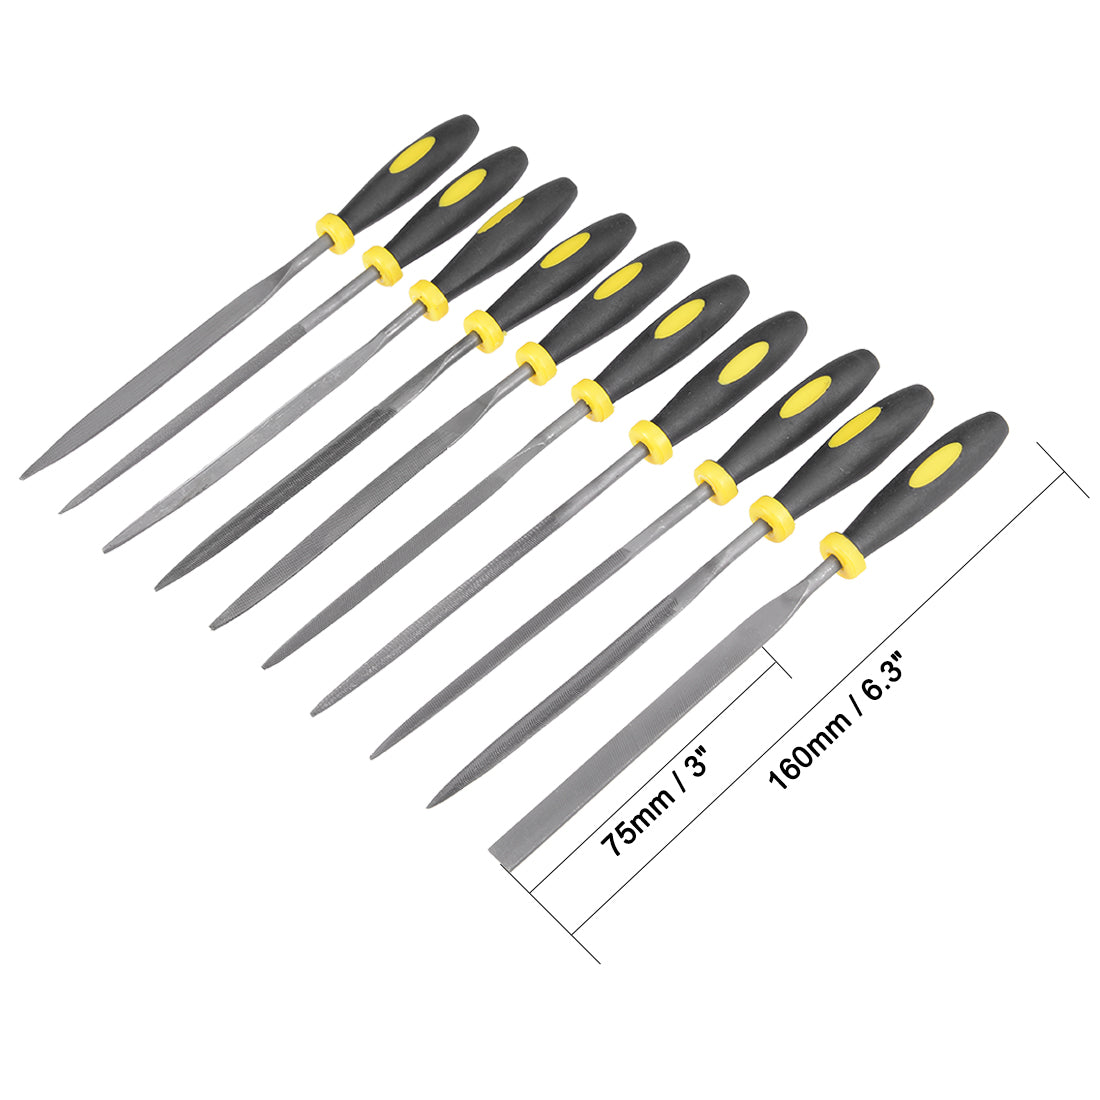 uxcell Uxcell 10Pcs Smooth Cut Bearing Steel Needle File Set with Rubber Handle, 4mm x 160mm